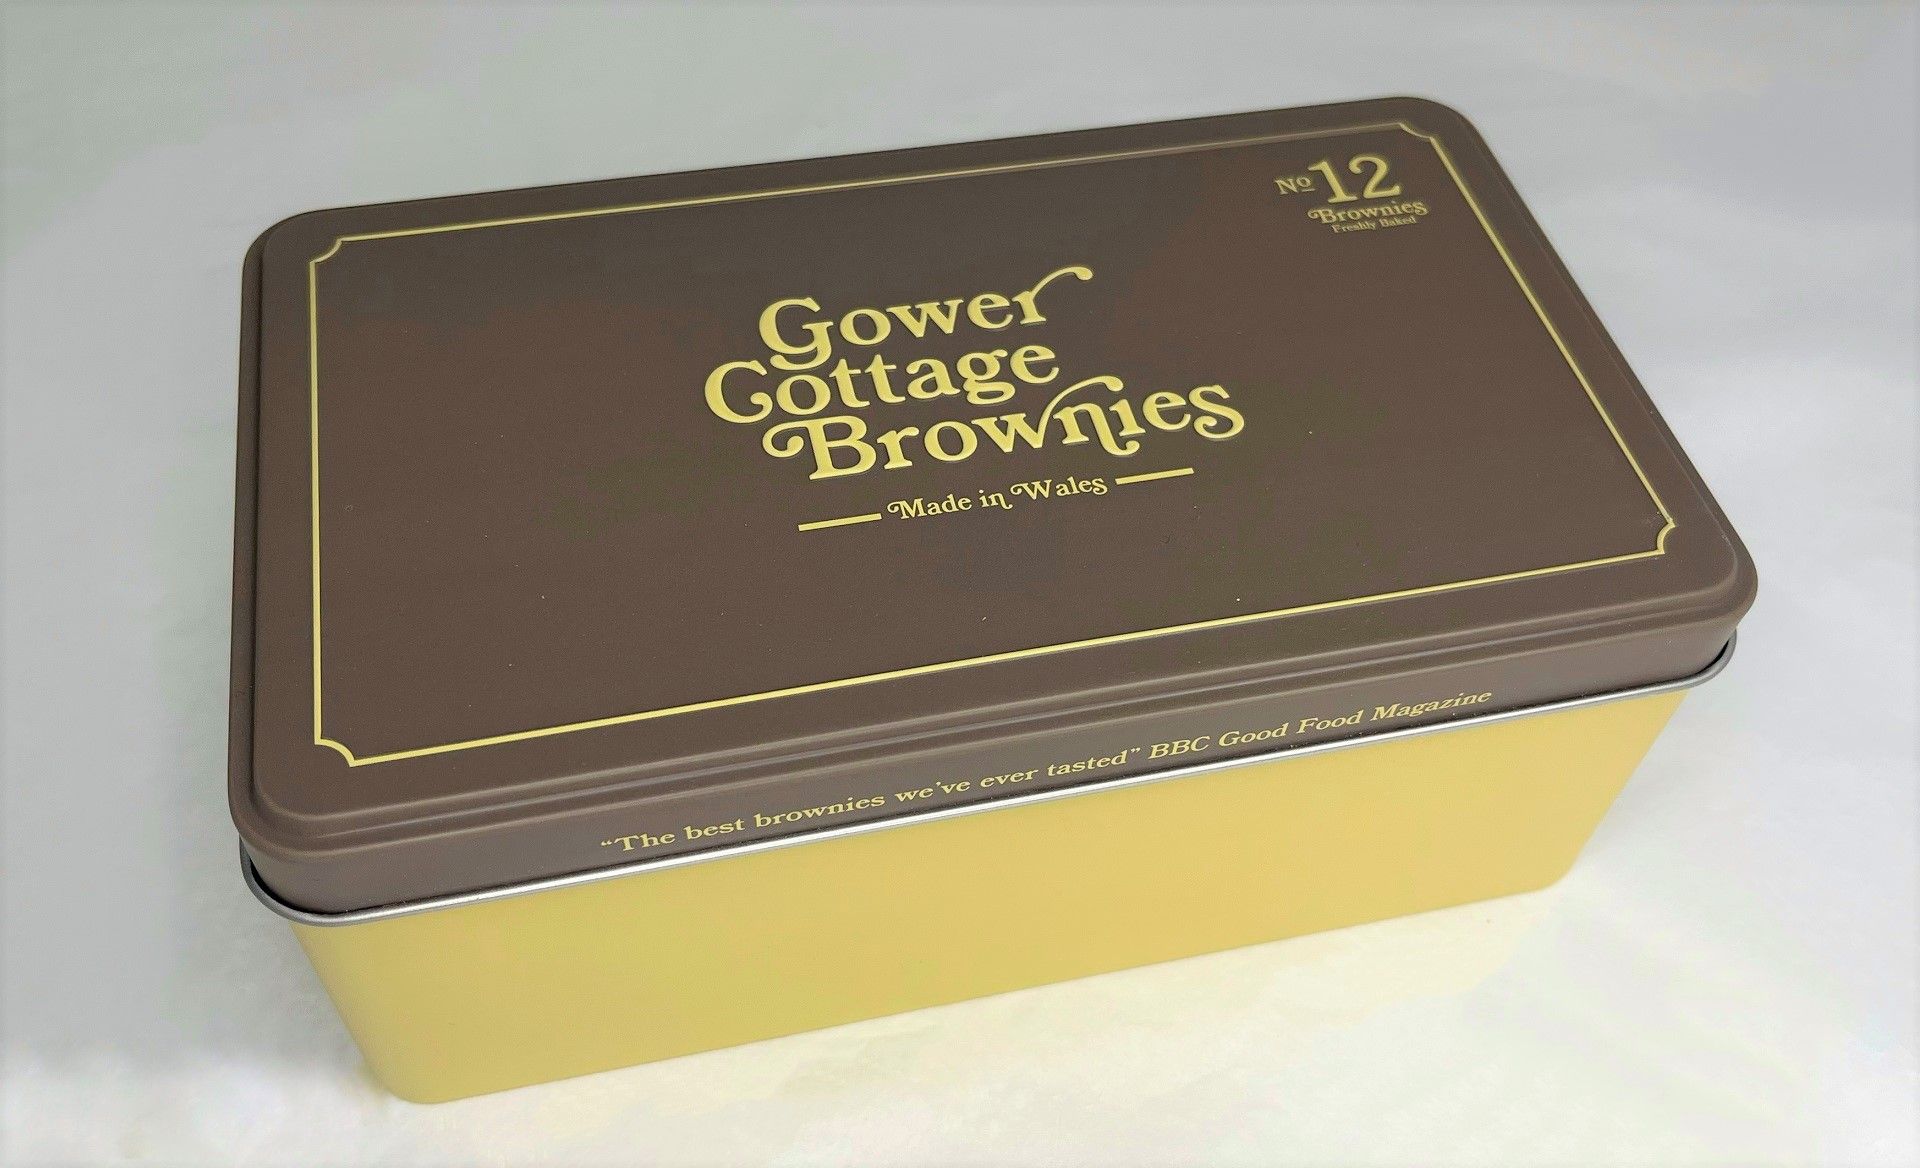 Gluten Free Gower Cottage Brownies in a presentation tin